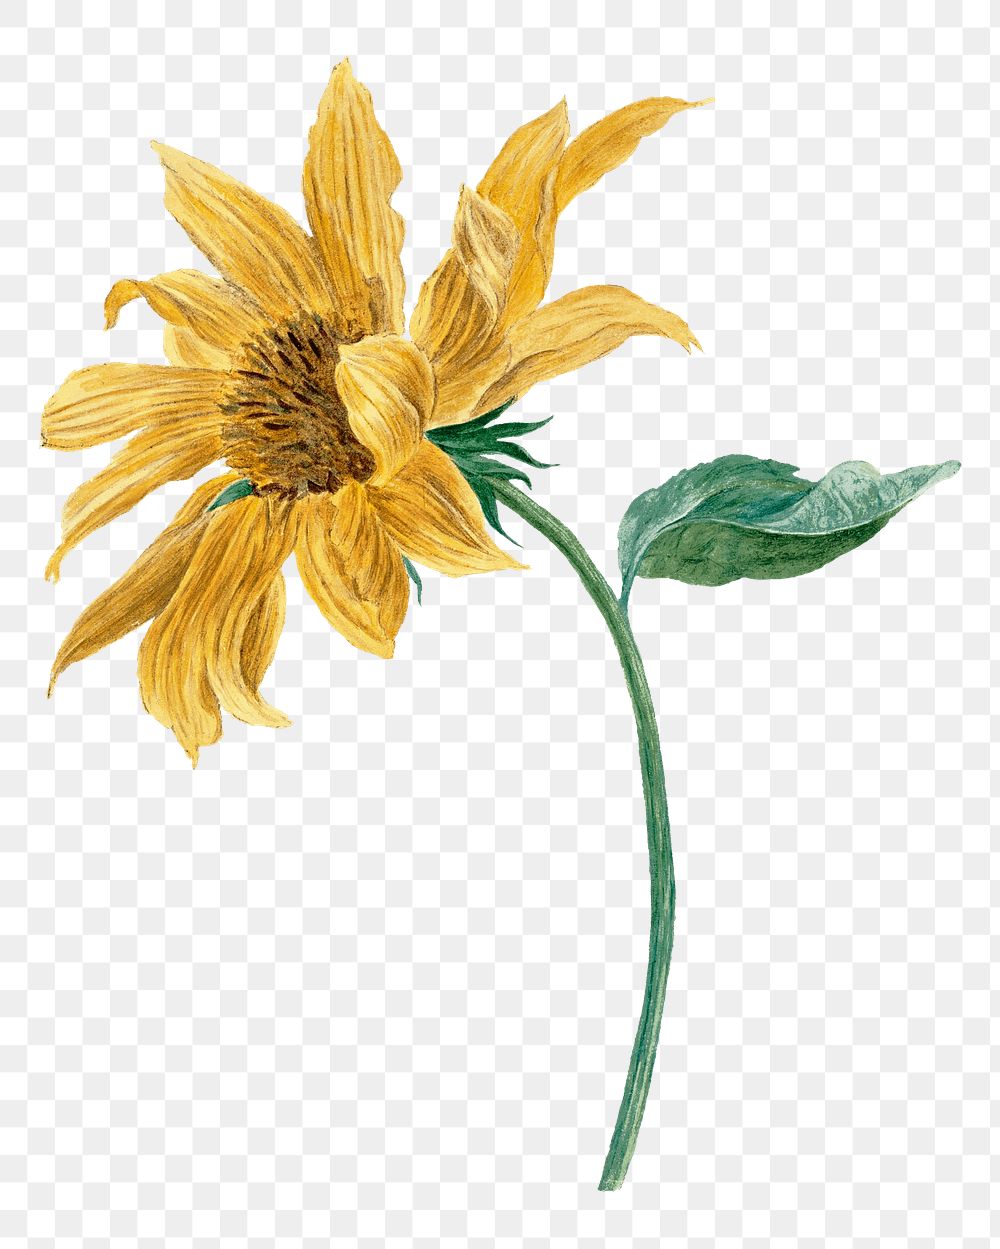 Sunflower png illustration, remixed from artworks by Michiel van Huysum